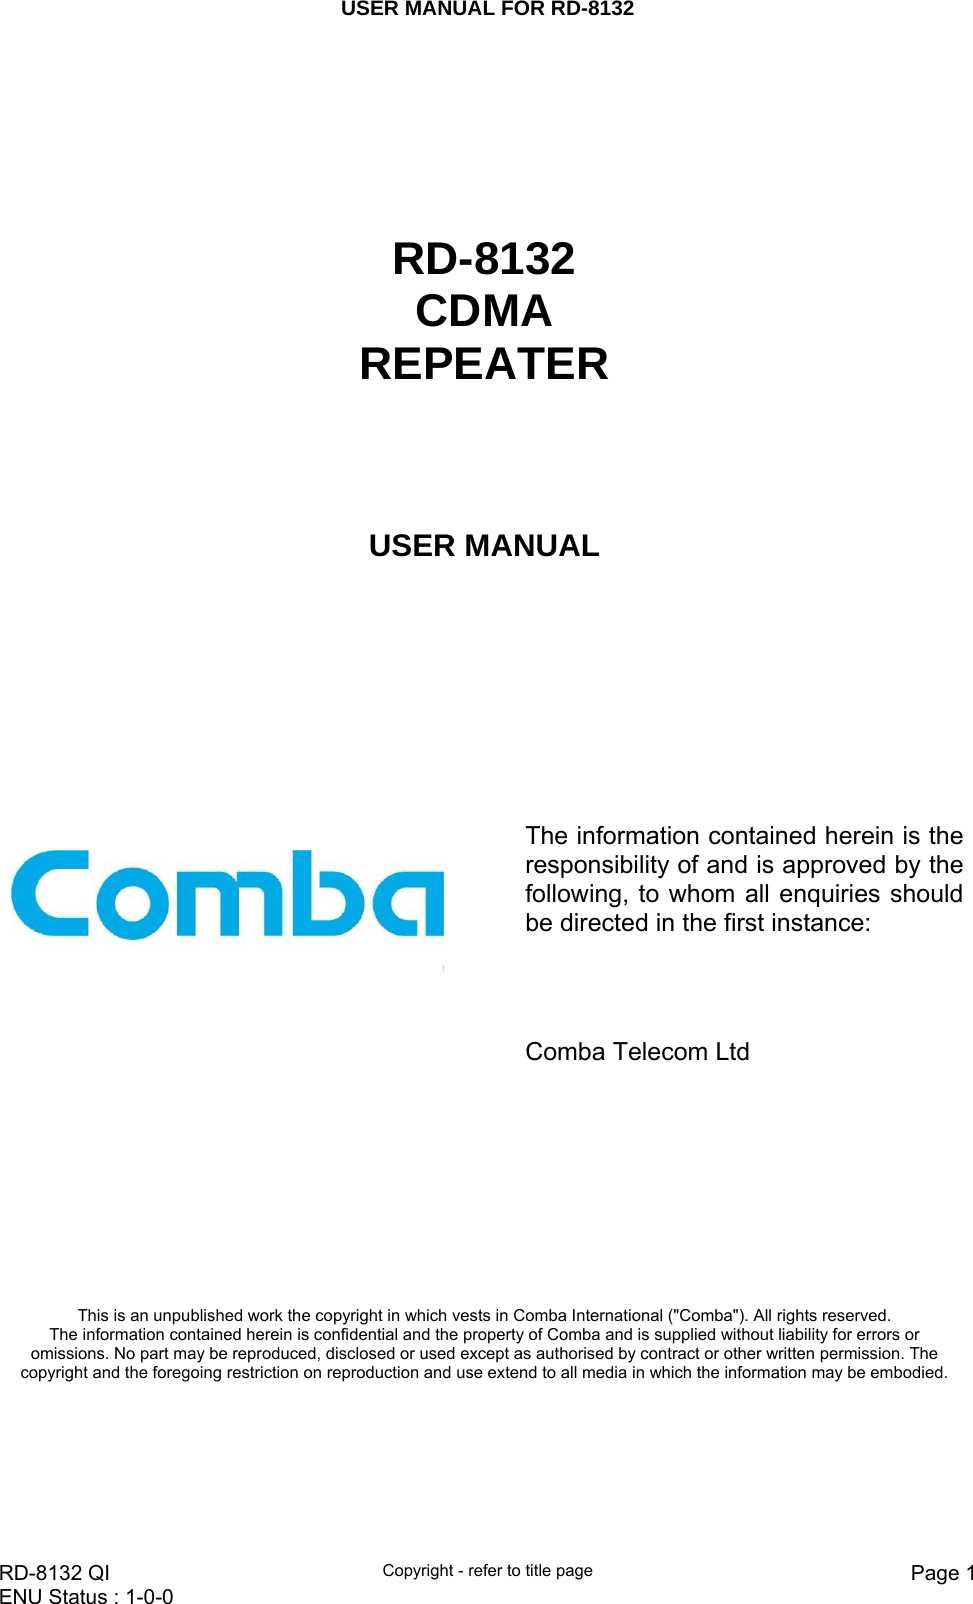 USER MANUAL FOR RD-8132    RD-8132 QI  Copyright - refer to title page  Page 1ENU Status : 1-0-0         RD-8132 CDMA REPEATER USER MANUAL        The information contained herein is the responsibility of and is approved by the following, to whom all enquiries should be directed in the first instance:               Comba Telecom Ltd This is an unpublished work the copyright in which vests in Comba International (&quot;Comba&quot;). All rights reserved. The information contained herein is confidential and the property of Comba and is supplied without liability for errors or omissions. No part may be reproduced, disclosed or used except as authorised by contract or other written permission. The copyright and the foregoing restriction on reproduction and use extend to all media in which the information may be embodied. 